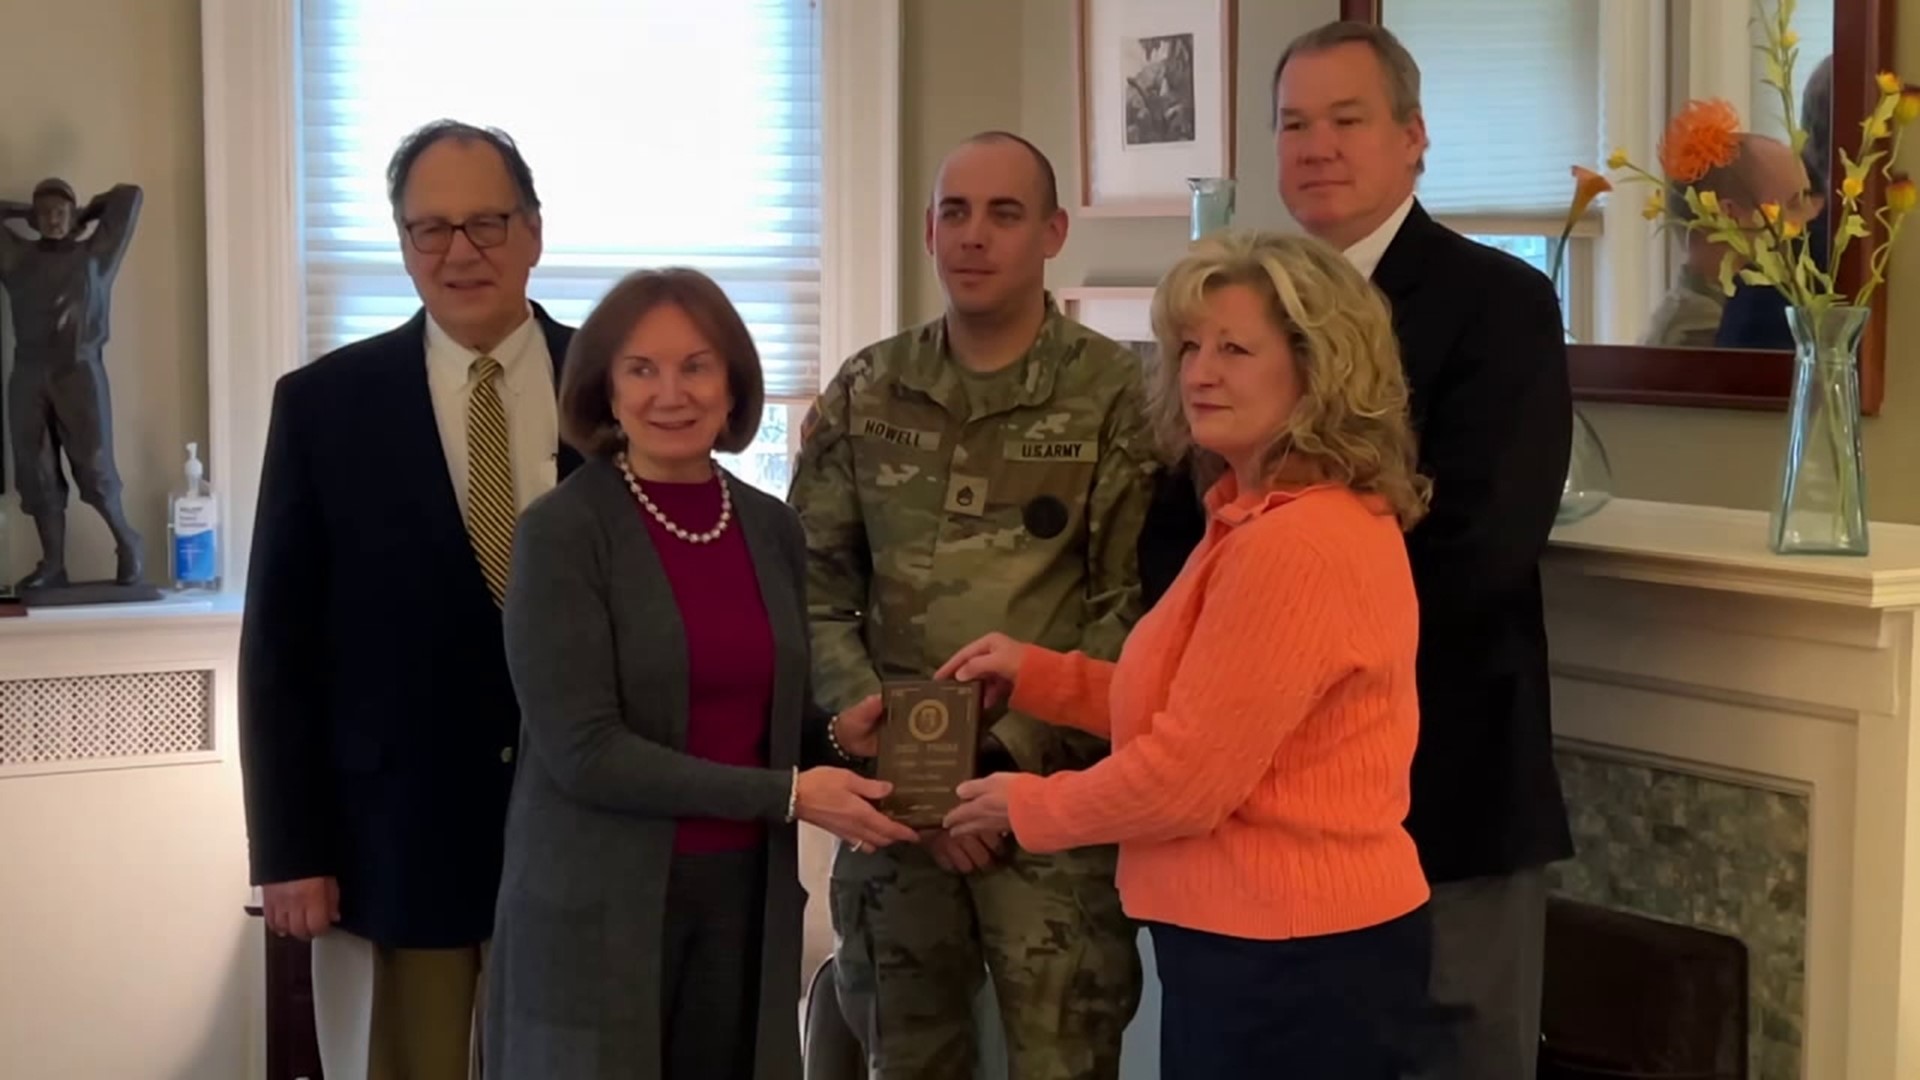 For the second year in a row, Keystone College received an award for its commitment to veterans and members of the Pennsylvania National Guard.